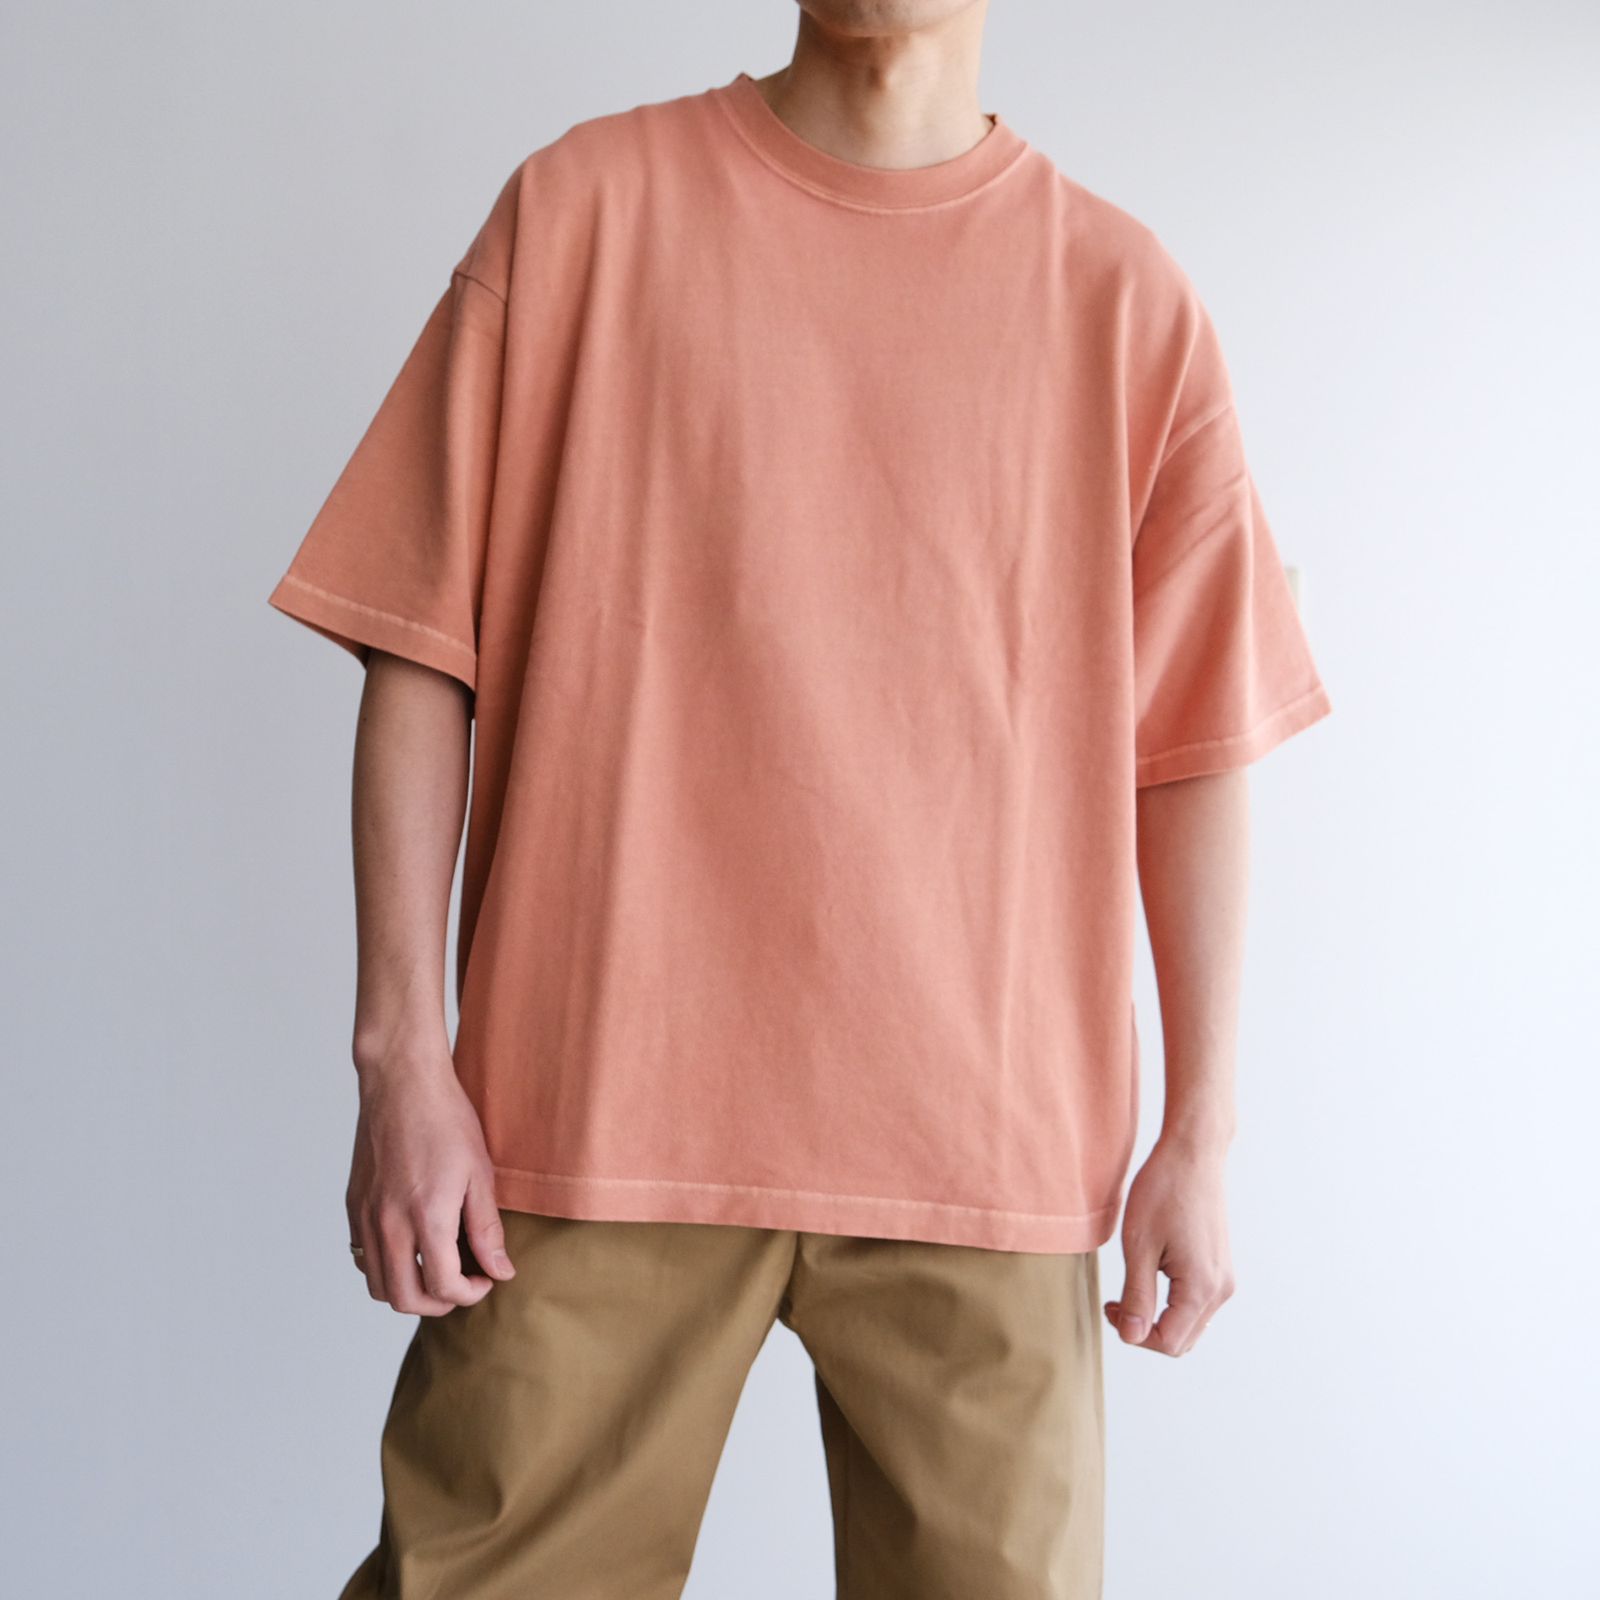 EVCON - Pigment Wide S/S T-Shirt -Tシャツ-（L.Pink / L.ピンク